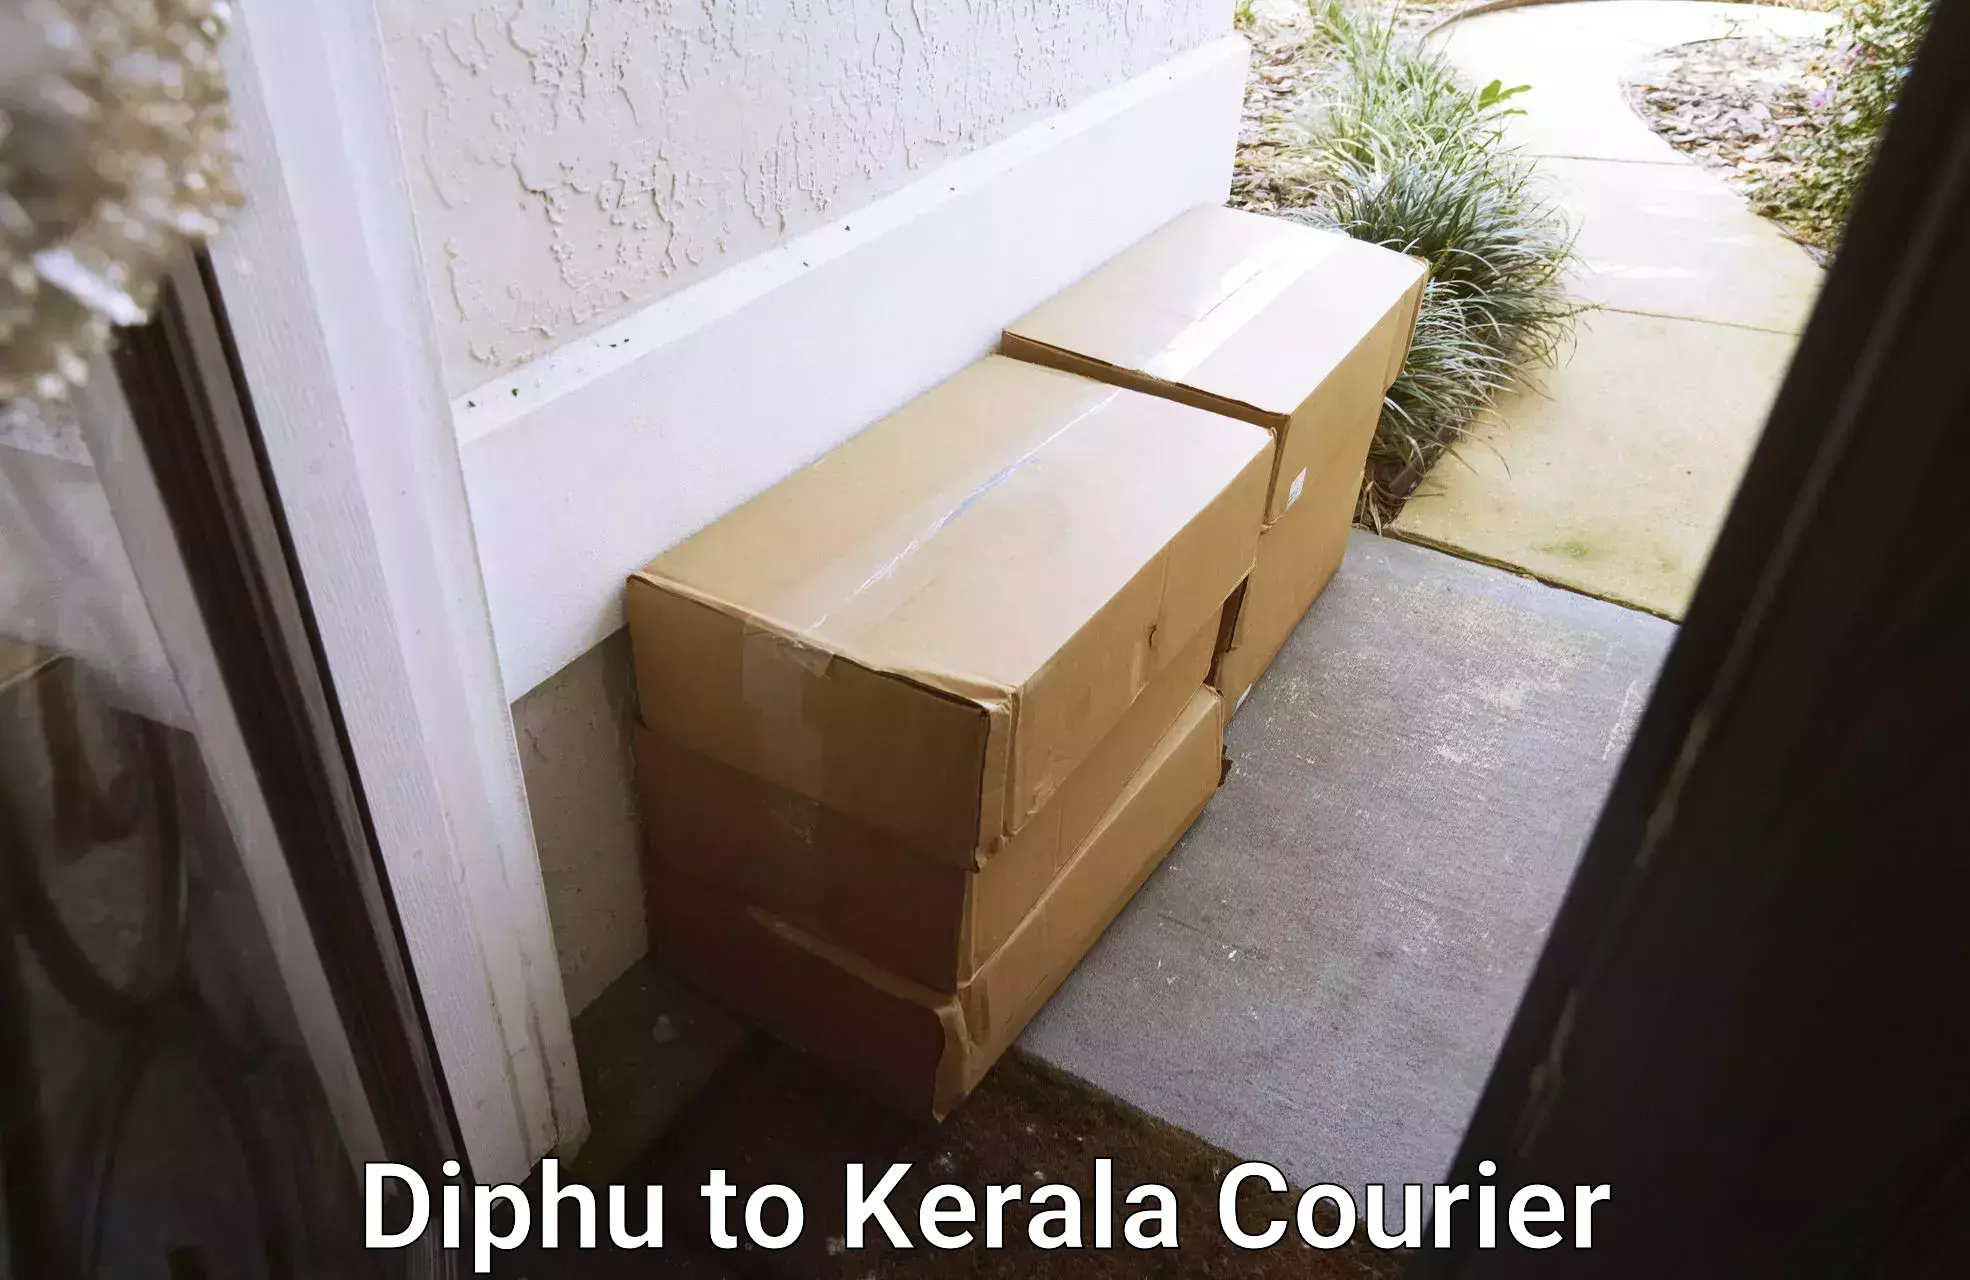 Round-the-clock parcel delivery Diphu to Cochin Port Kochi